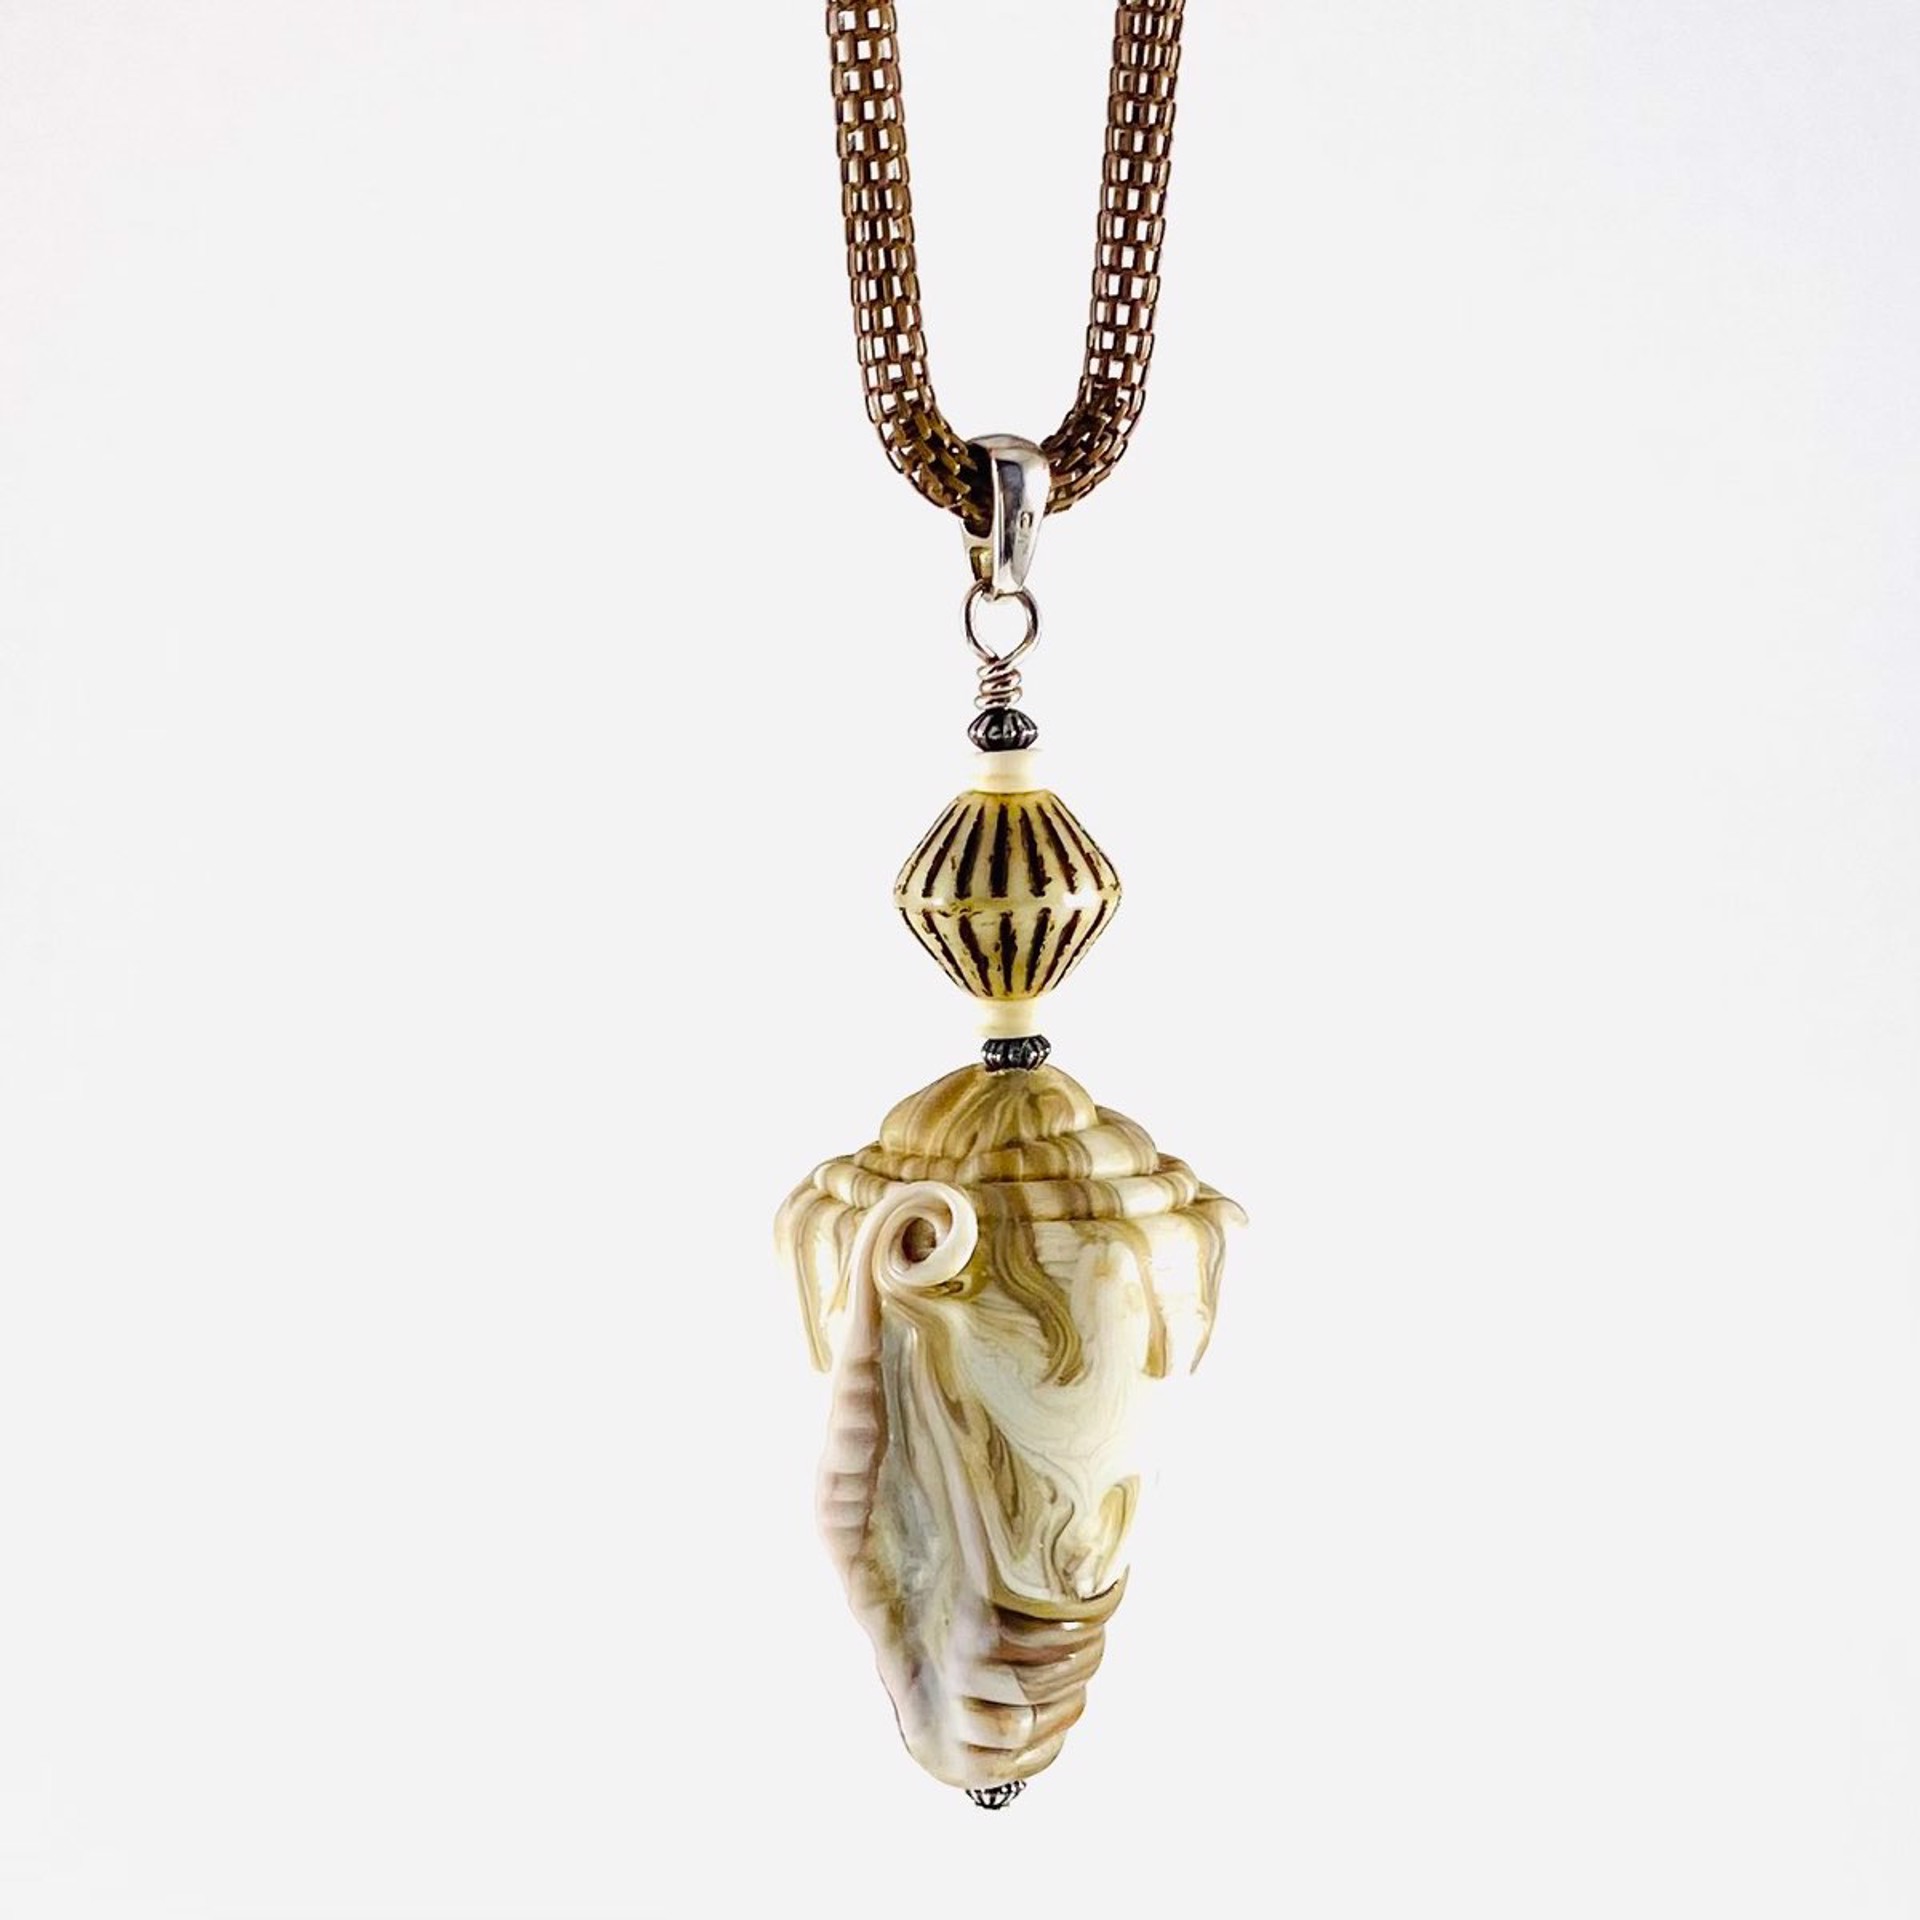 LS21-443N Tan and Ivory Shell Pendant on Lt Brown Mesh Chain by Linda Sacra